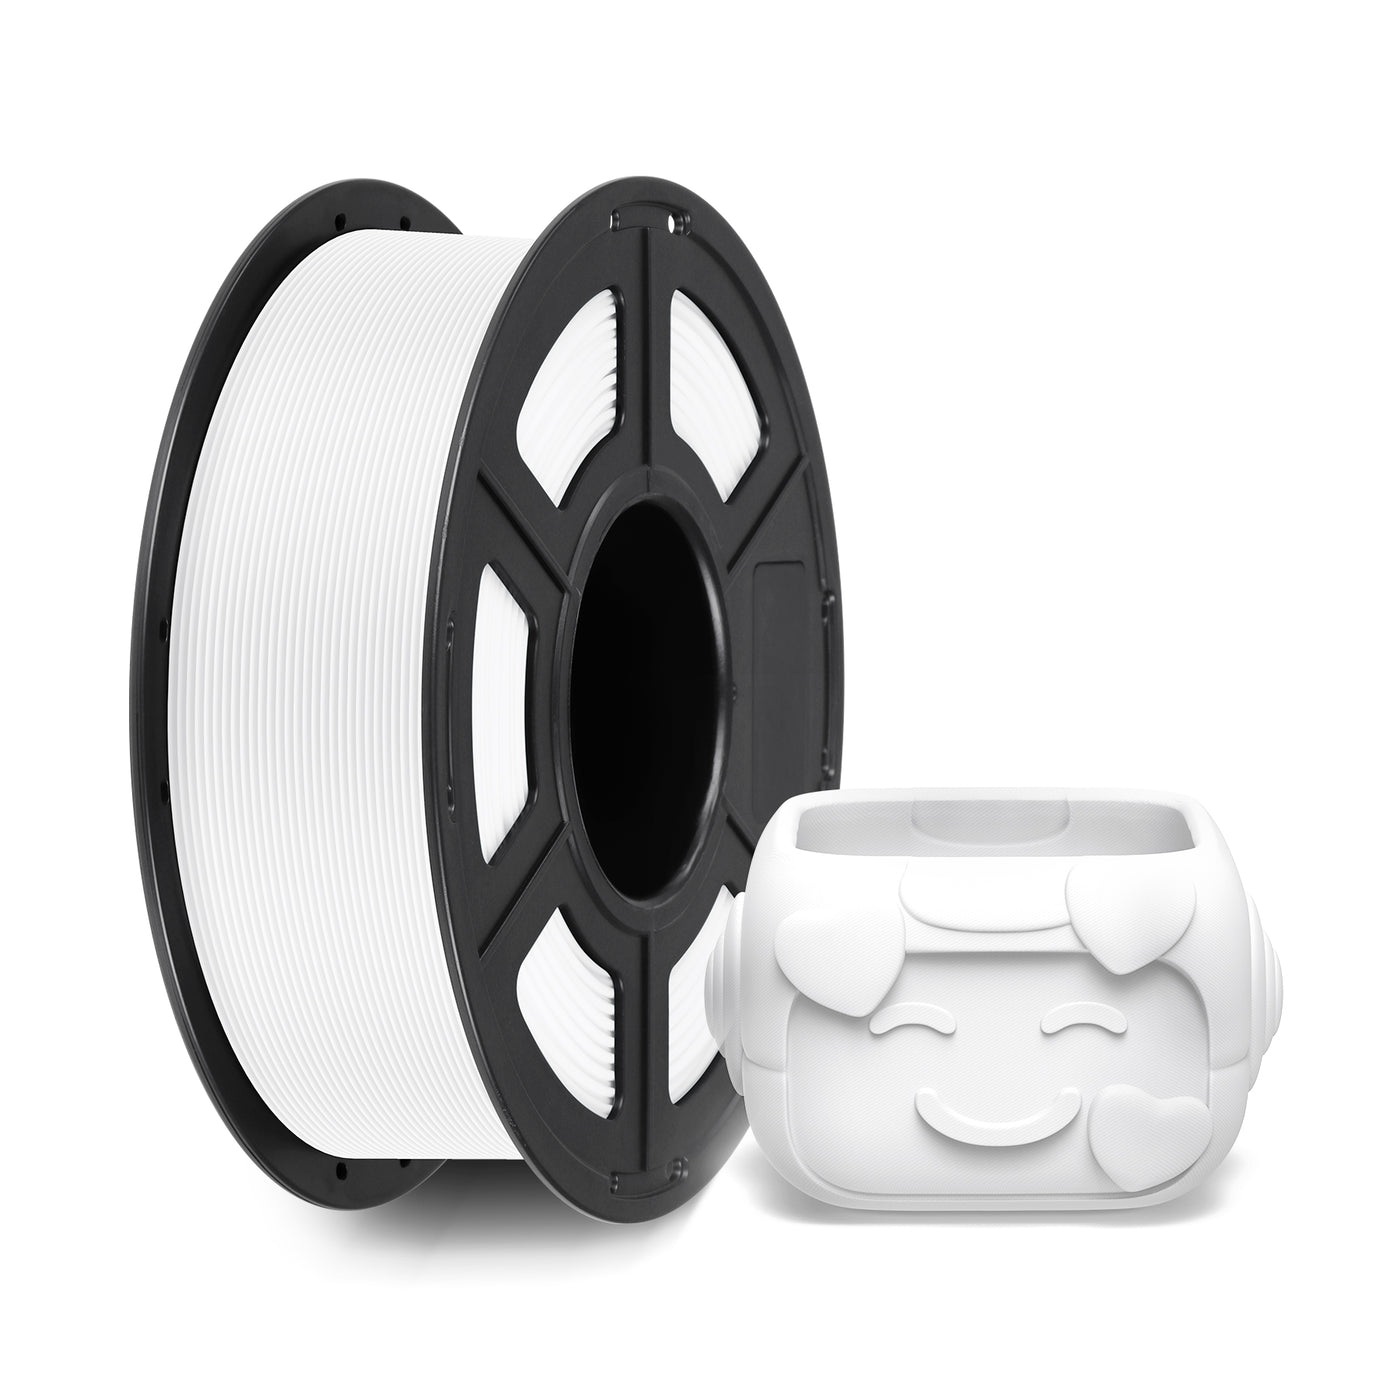 PETG Filament - Get 3 for the price of 2